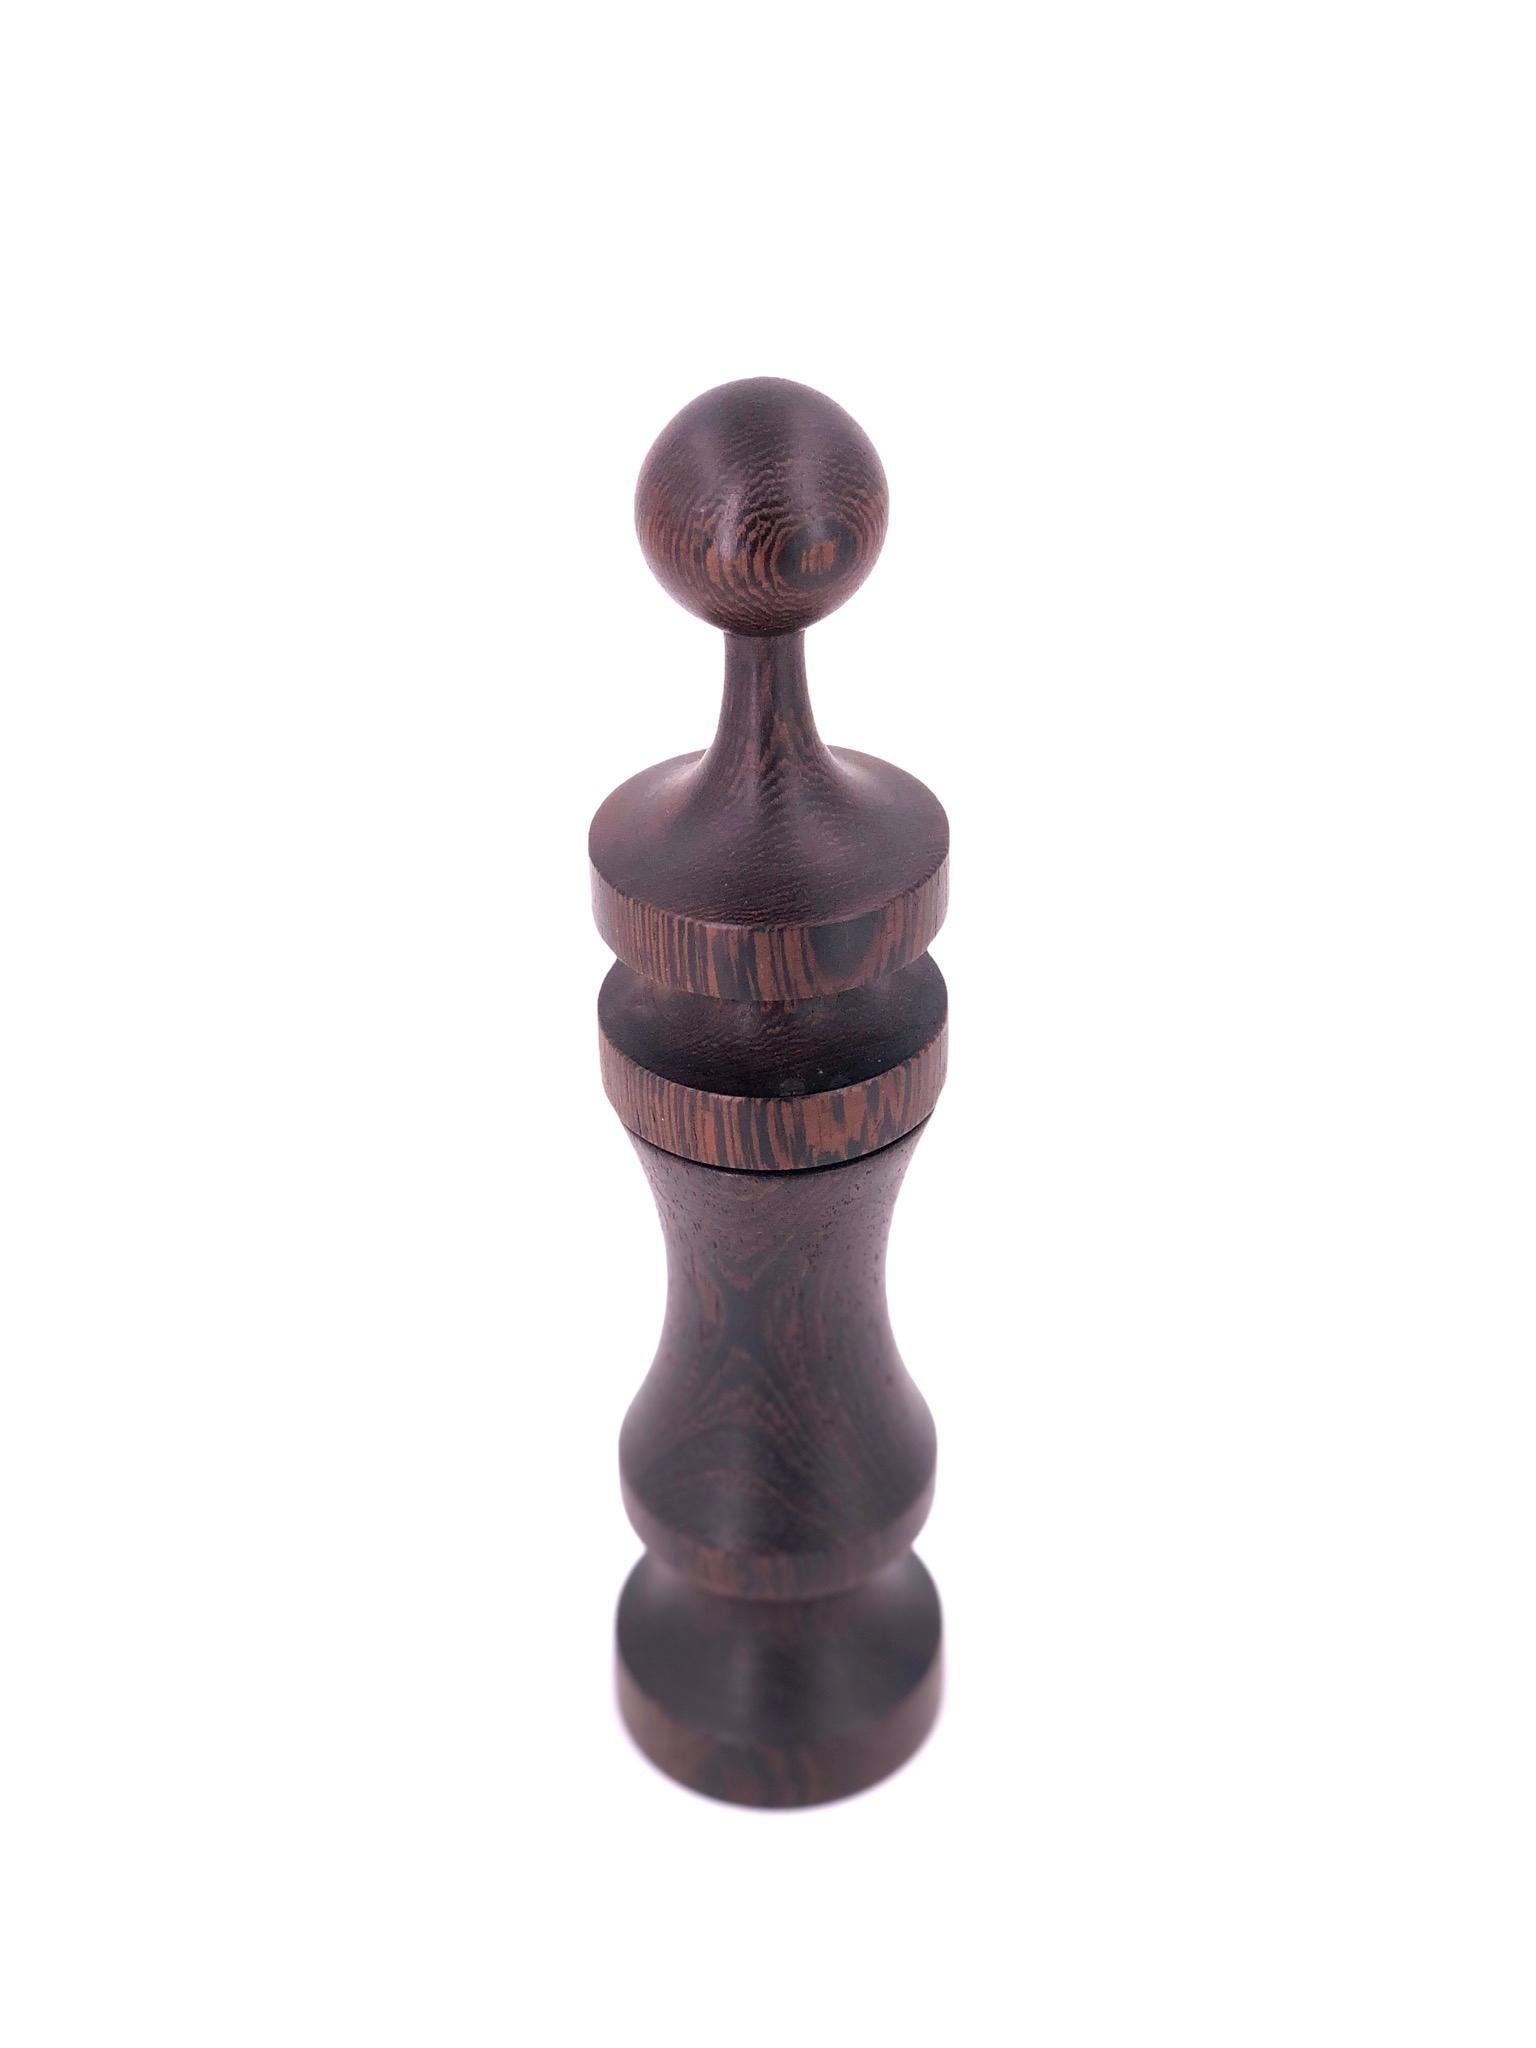 Beautiful shape with metal movement solid Wenge wood rare pepper grinder, by Laurids Longborg, circa 1960s made in Denmark great condition the top pulls up to place the peppercorns.